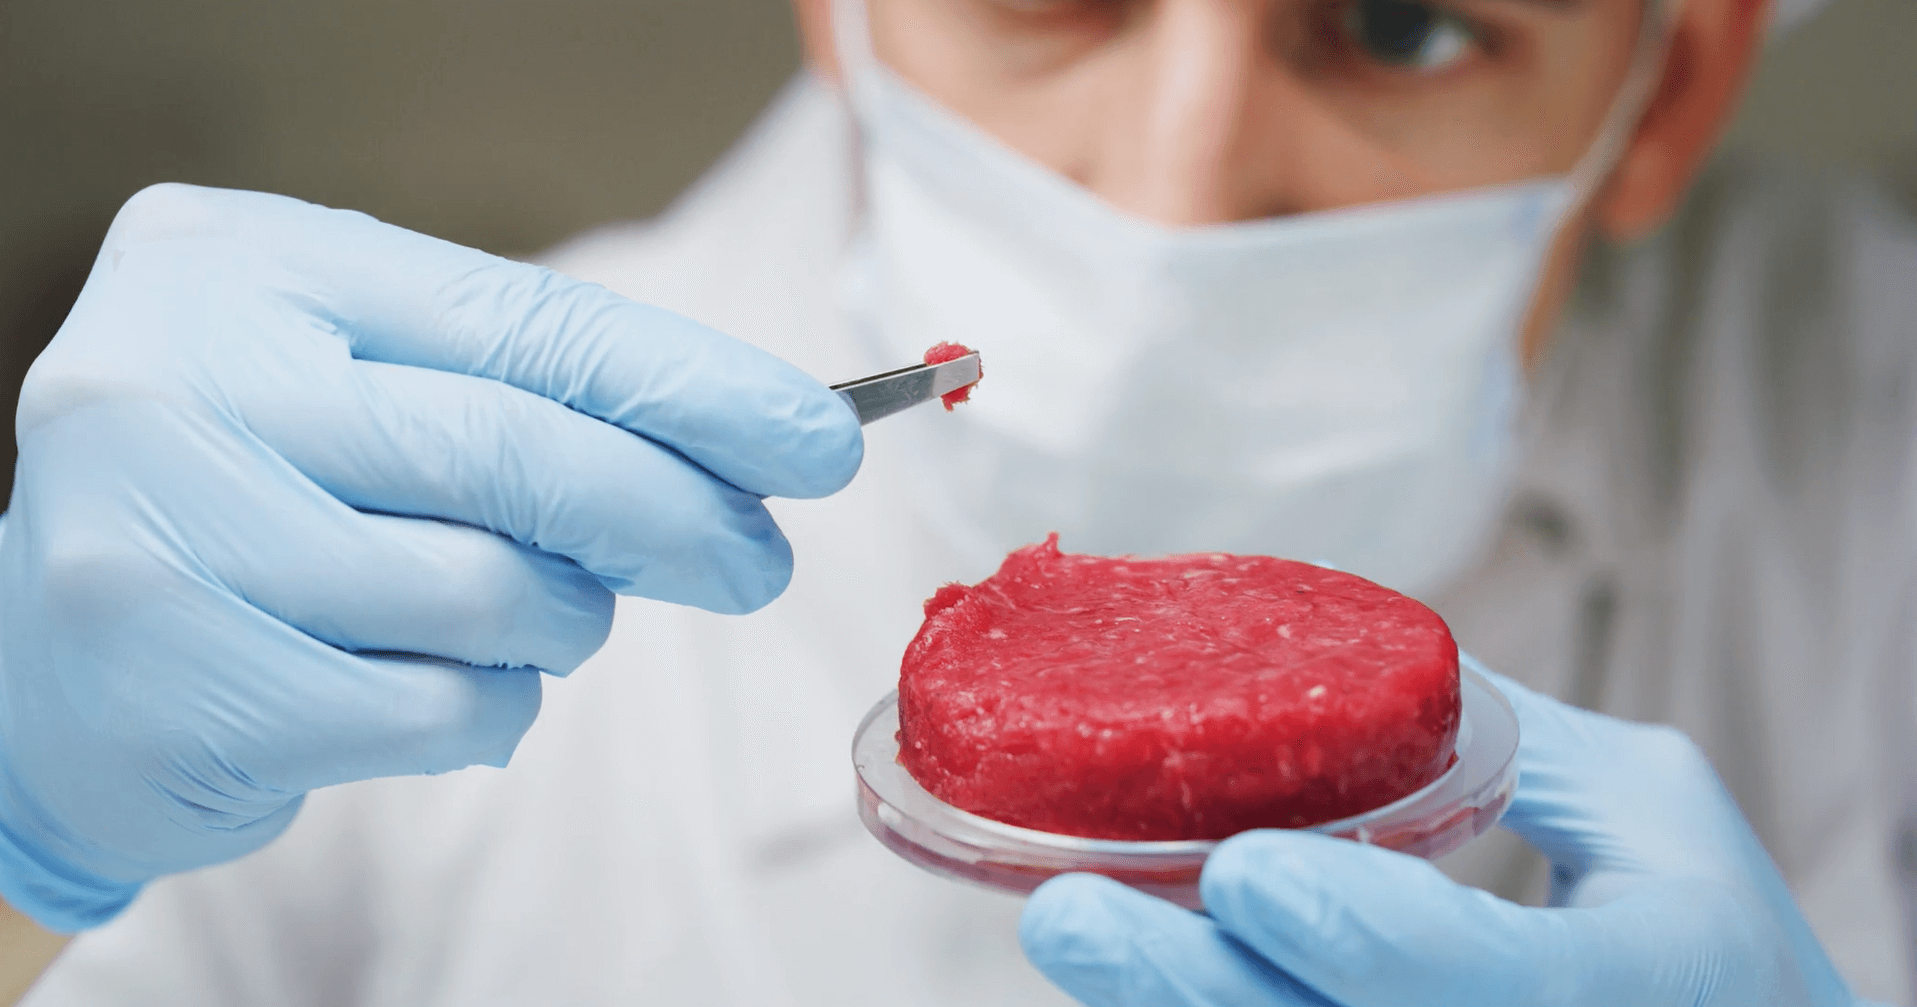 How does in-vitro beef look like?